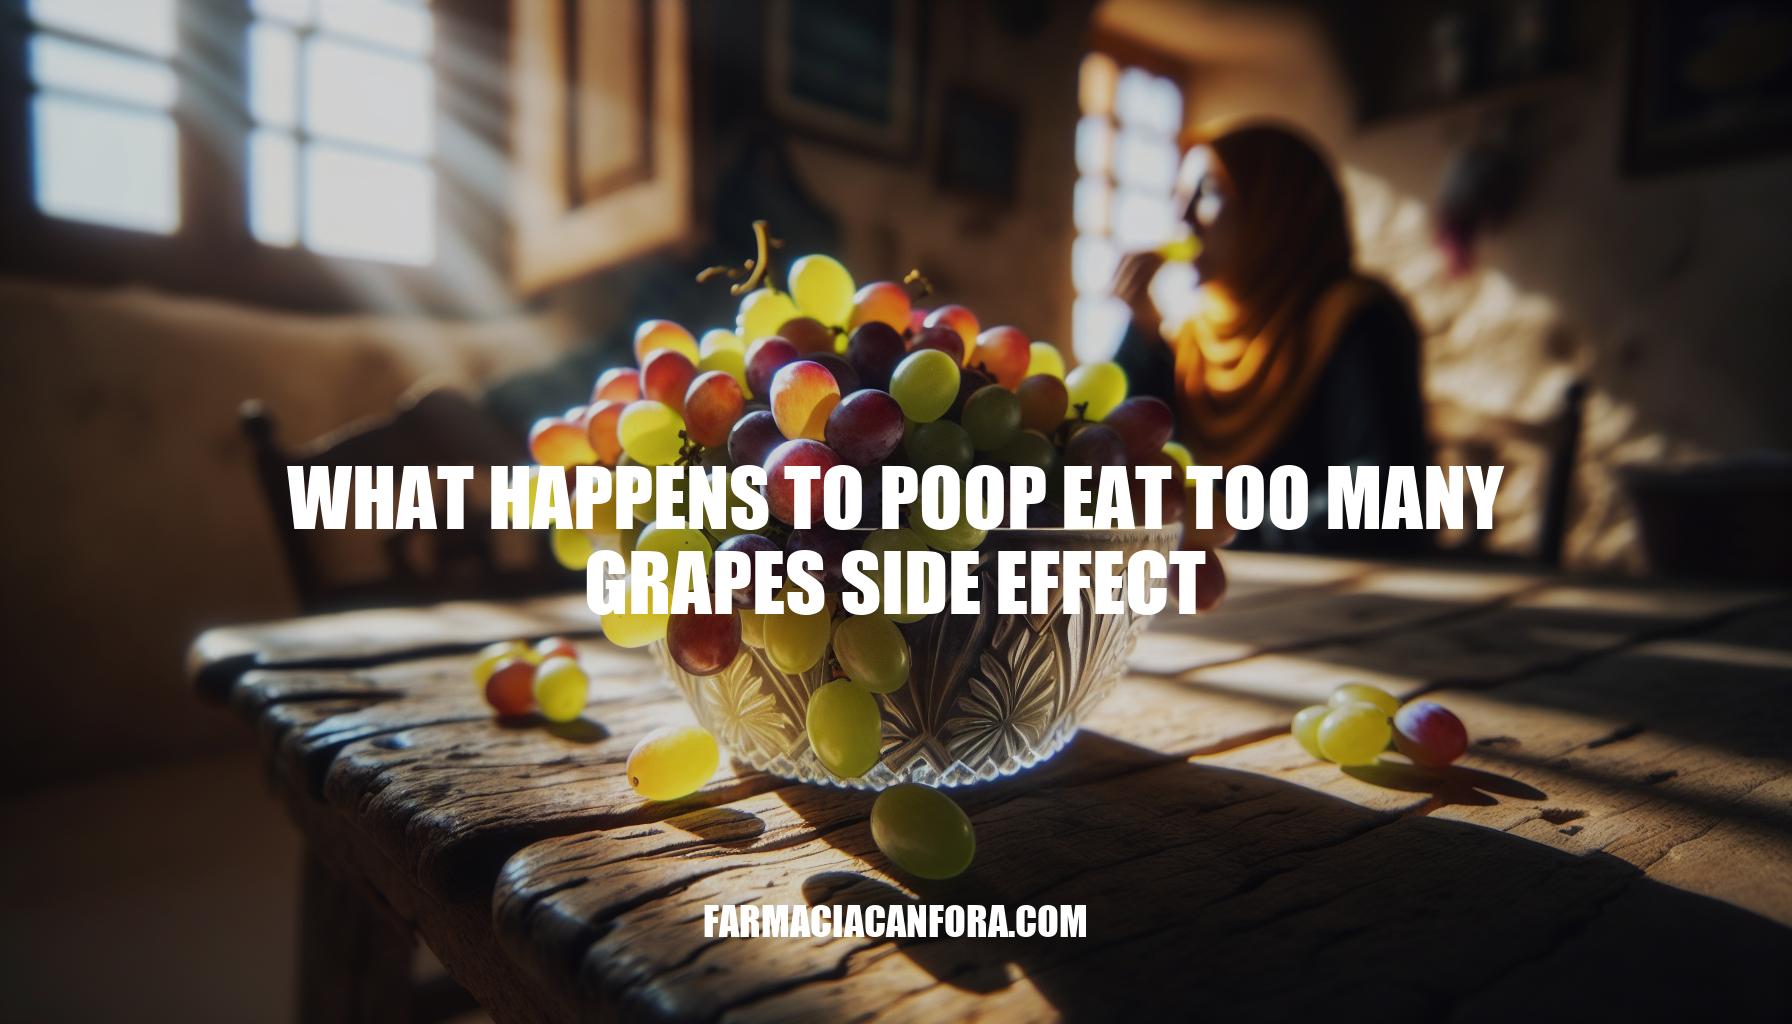 Side Effects of Eating Too Many Grapes: What Happens to Your Poop